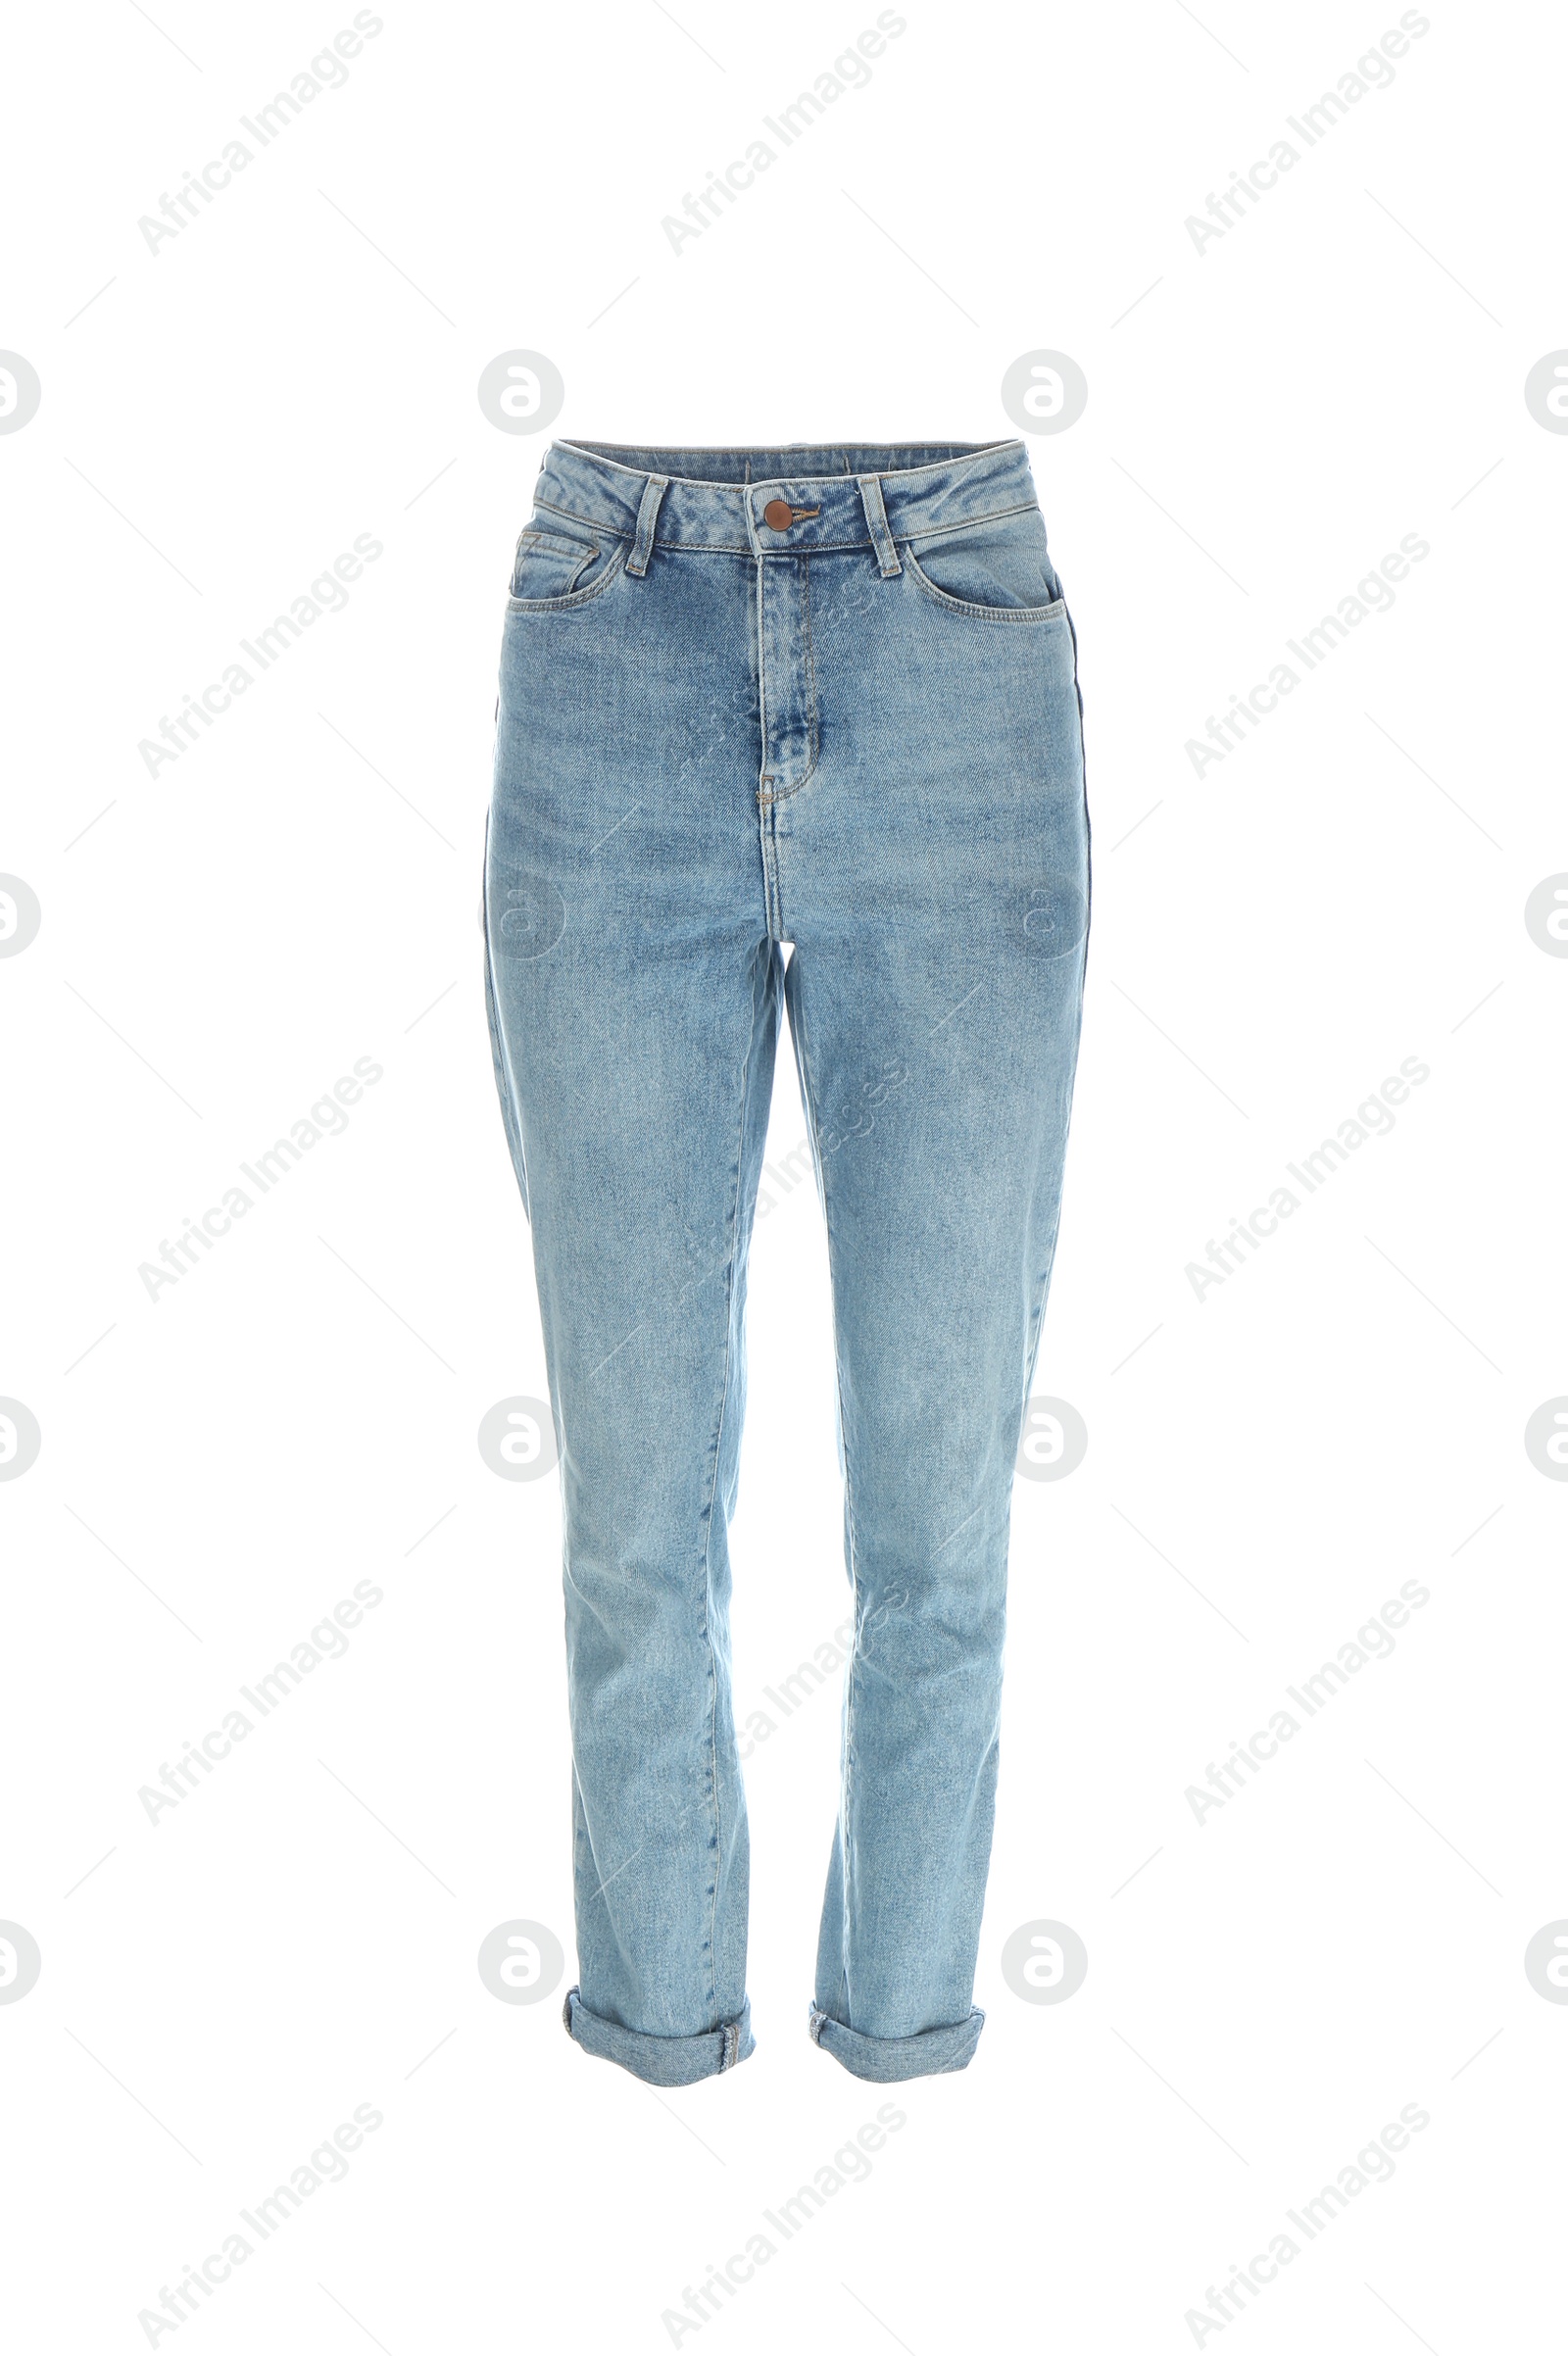 Photo of Stylish jeans on mannequin against white background. Women's clothes